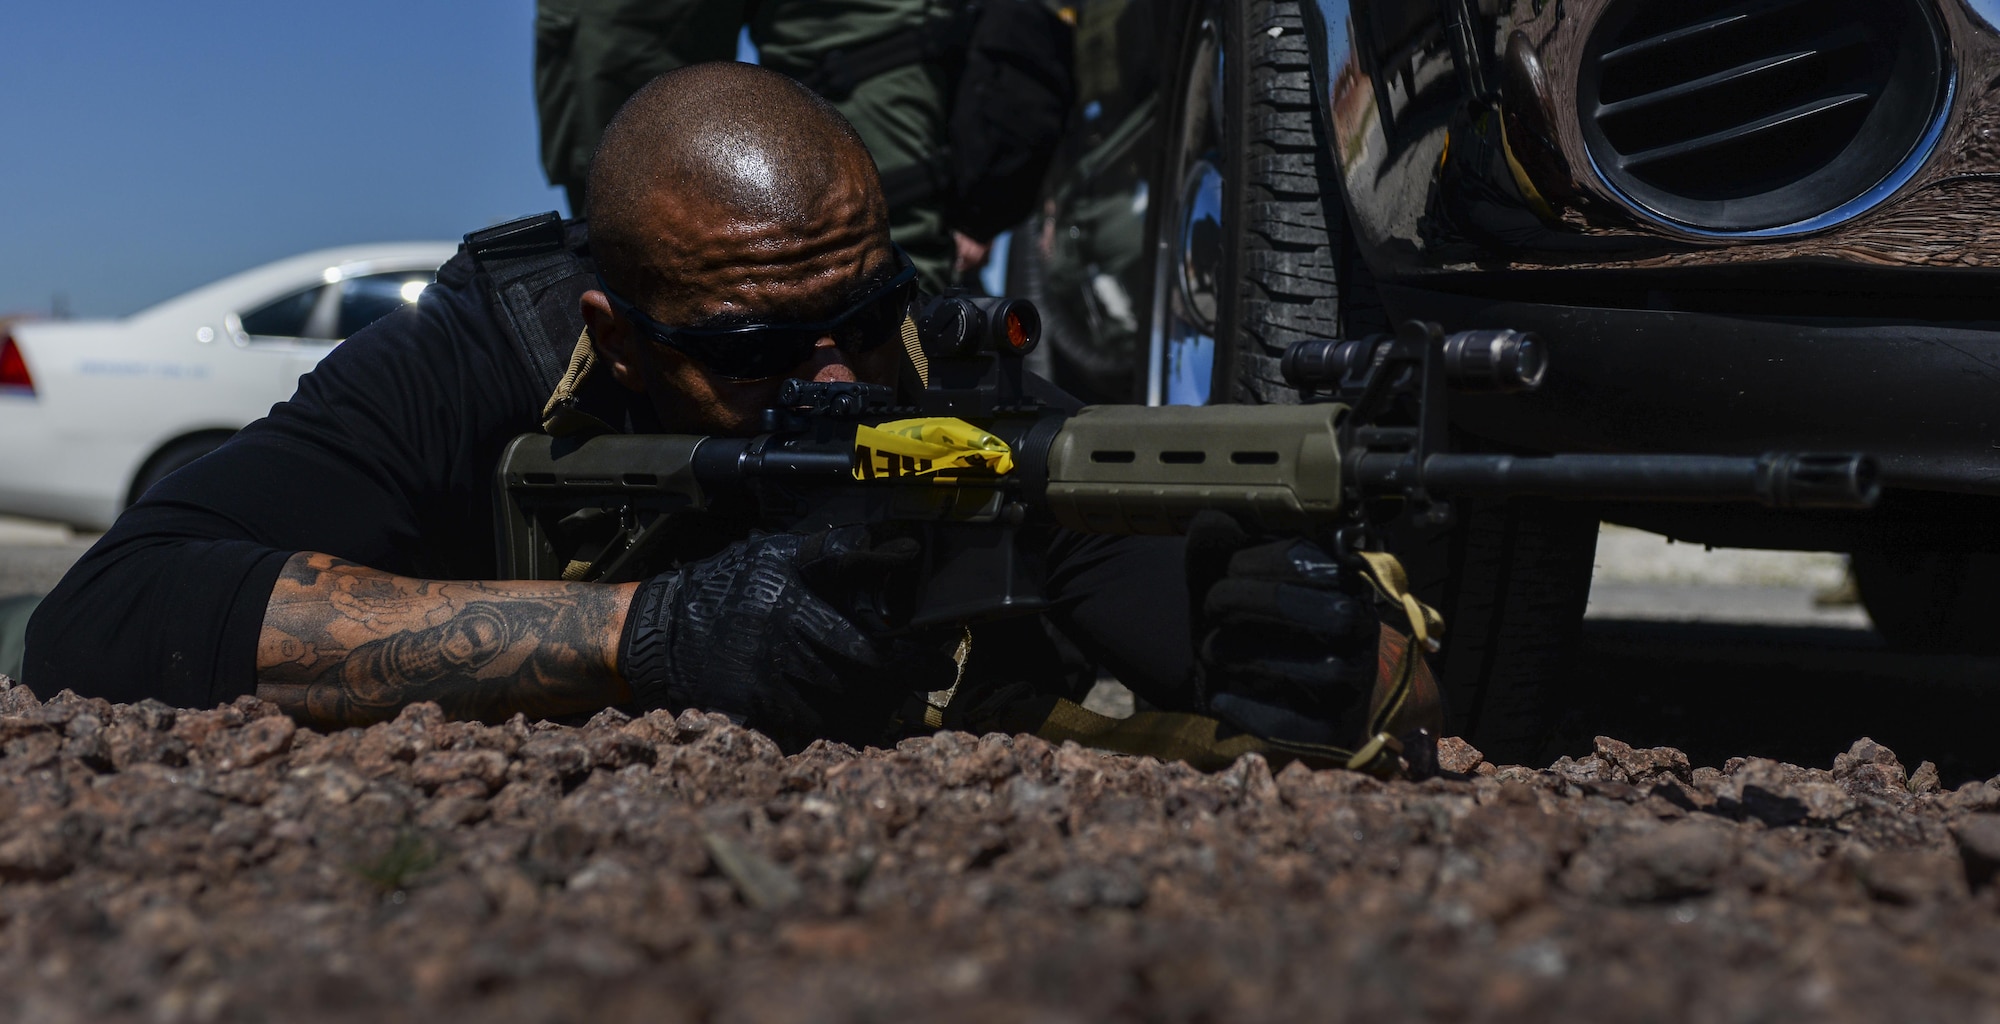 A Las Vegas Metropolitan Police Department officer lays prone as his team helps to secure the scene of a simulated active shooter during a base exercise at Nellis Air Force Base, Nev., May 12, 2016. In emergency situations such as an active shooter, local police and Security Forces work together in order to protect the base. (U.S. Air Force photo by Airman 1st Class Kevin Tanenbaum)